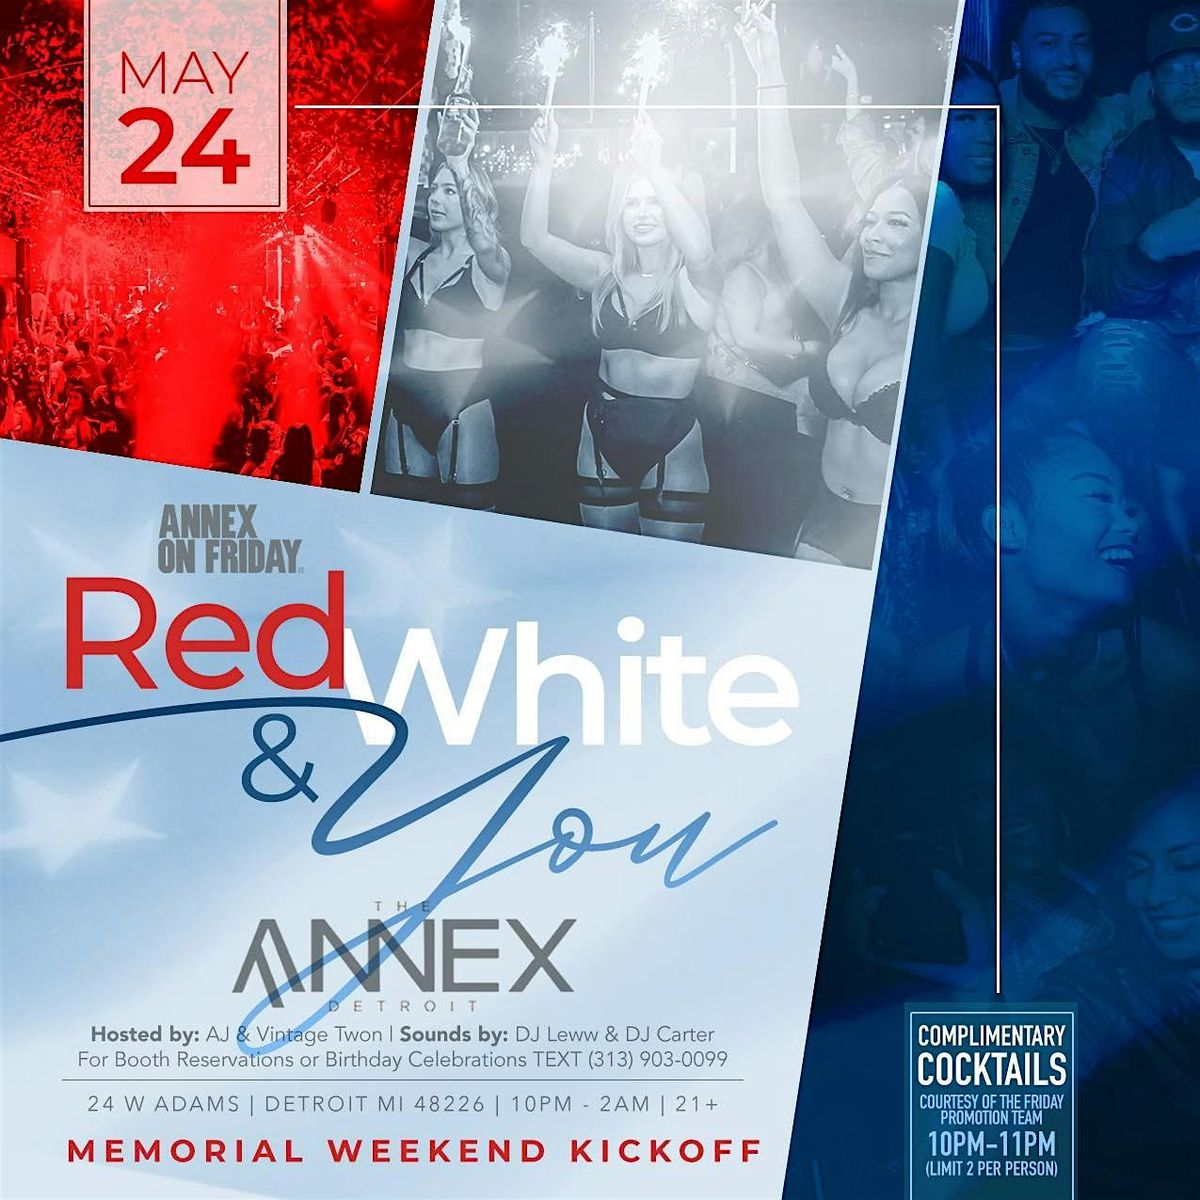 Annex on Friday Presents Red White & You on May 24